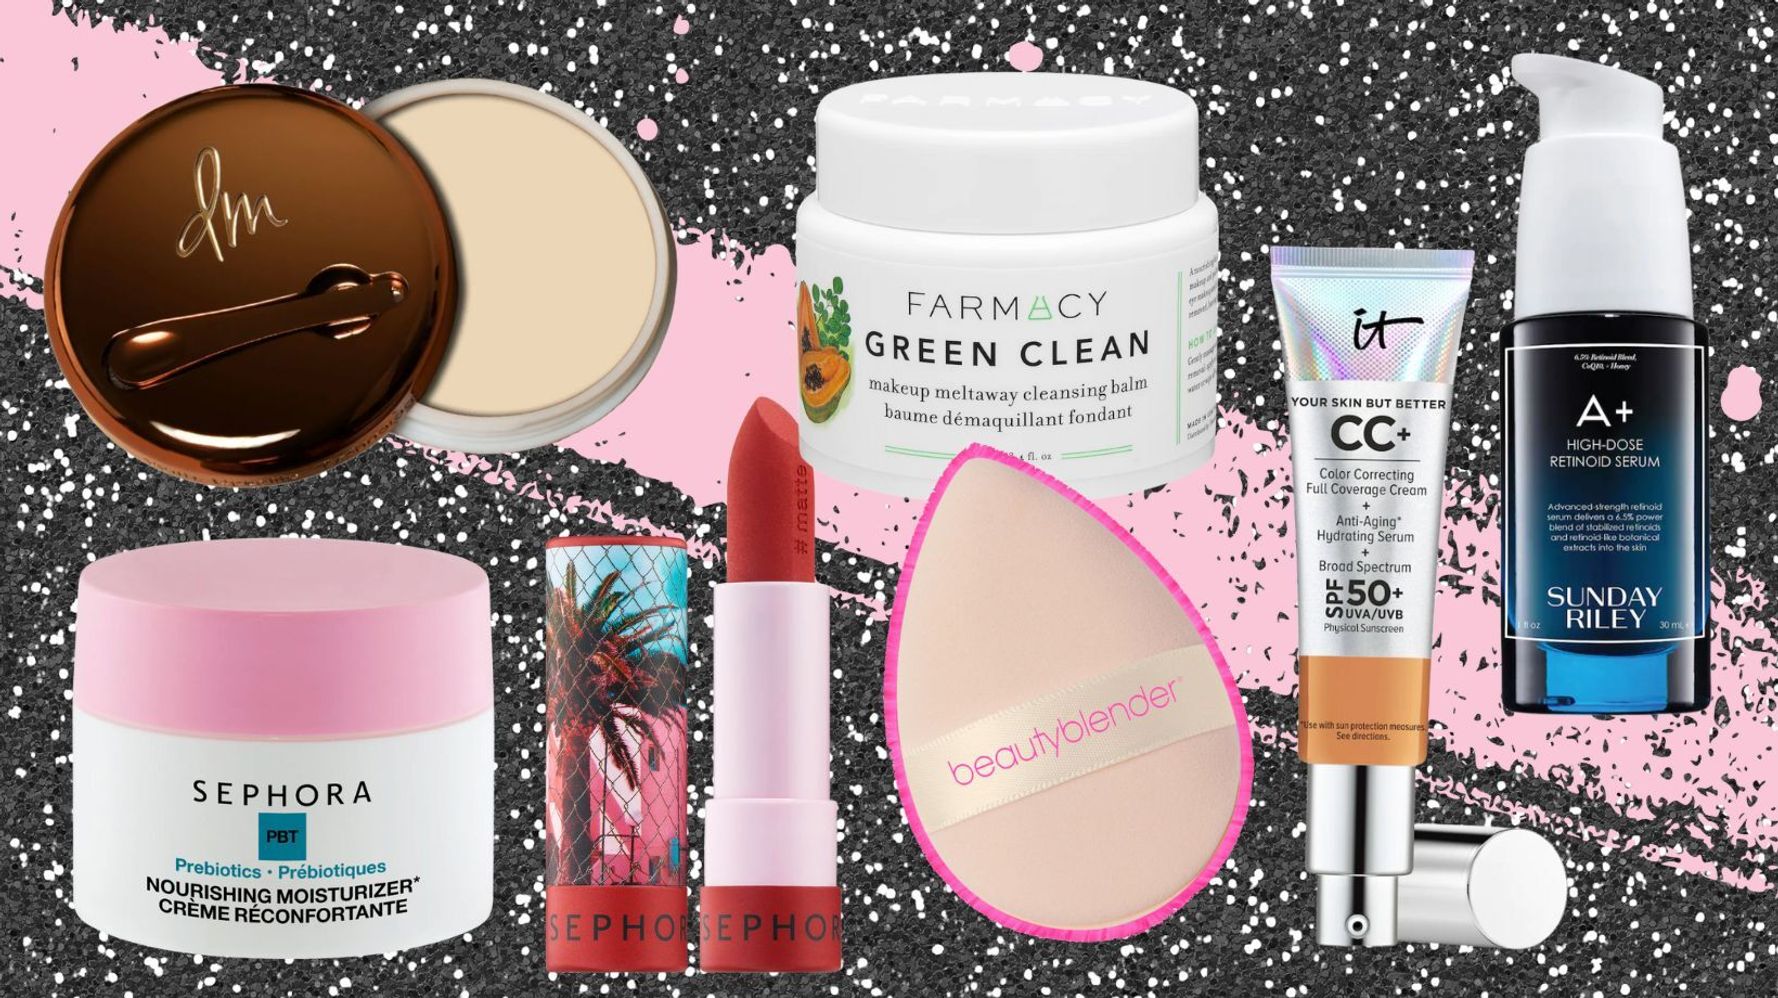 Why Benefit Cosmetics is betting on skincare